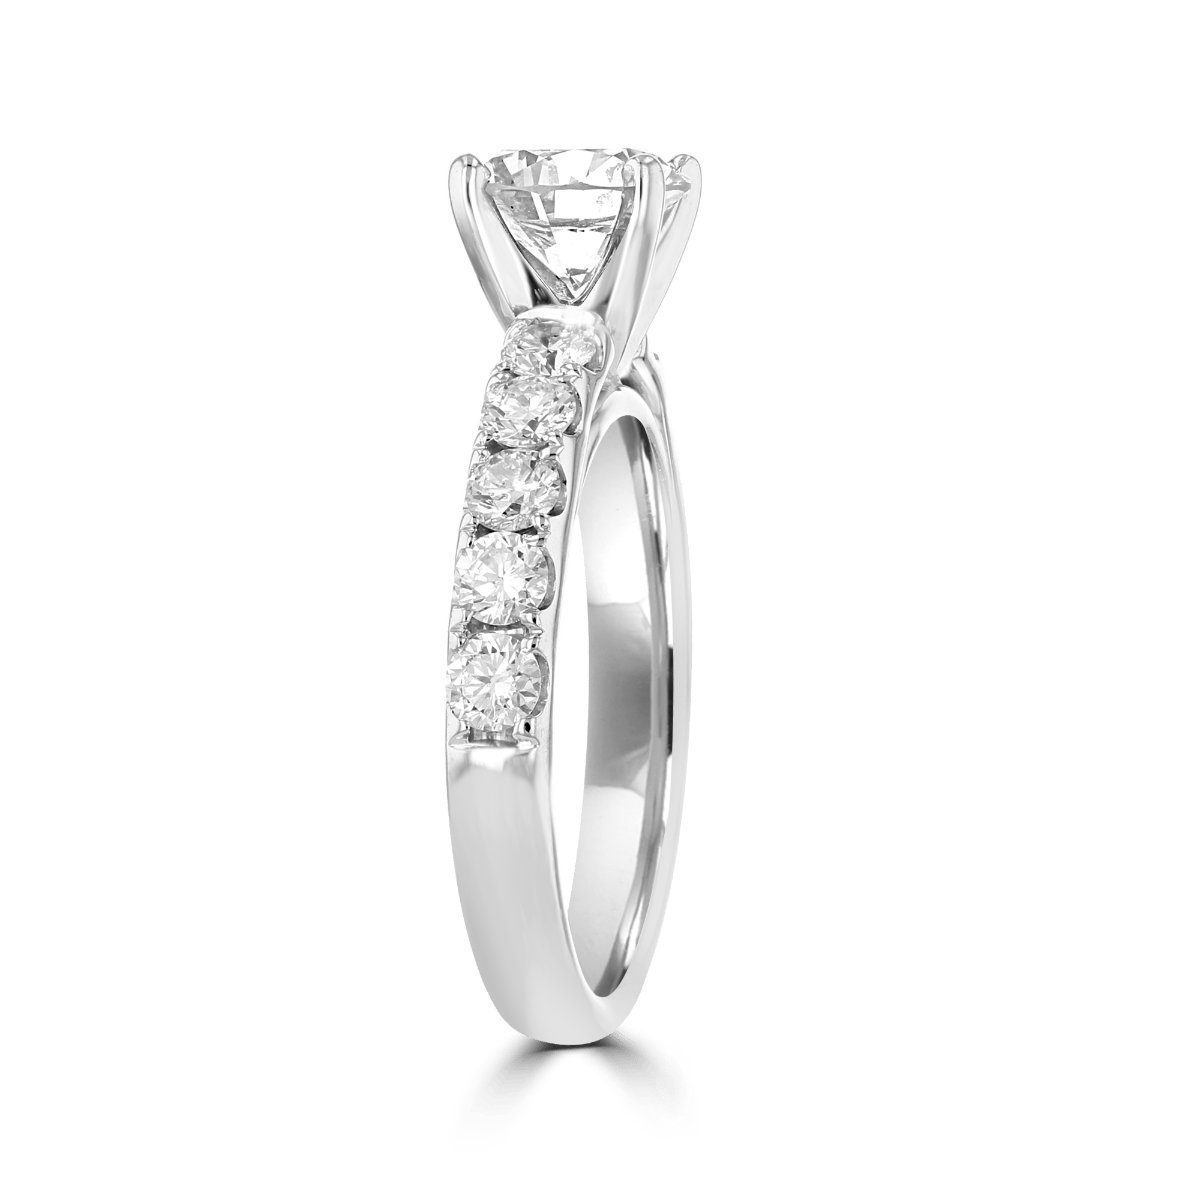 14KT 2 3/4 CTW Diamond Accent Ring With 2 Carat Center Diamond I1 / 4,I1 / 4.5,I1 / 5,I1 / 5.5,I1 / 6,I1 / 6.5,I1 / 7,I1 / 7.5,I1 / 8,I1 / 8.5,I1 / 9,SI / 4,SI / 4.5,SI / 5,SI / 5.5,SI / 6,SI / 6.5,SI / 7,SI / 7.5,SI / 8,SI / 8.5,SI / 9,VS / 4,VS / 4.5,VS / 5,VS / 5.5,VS / 6,VS / 6.5,VS / 7,VS / 7.5,VS / 8,VS / 8.5,VS / 9